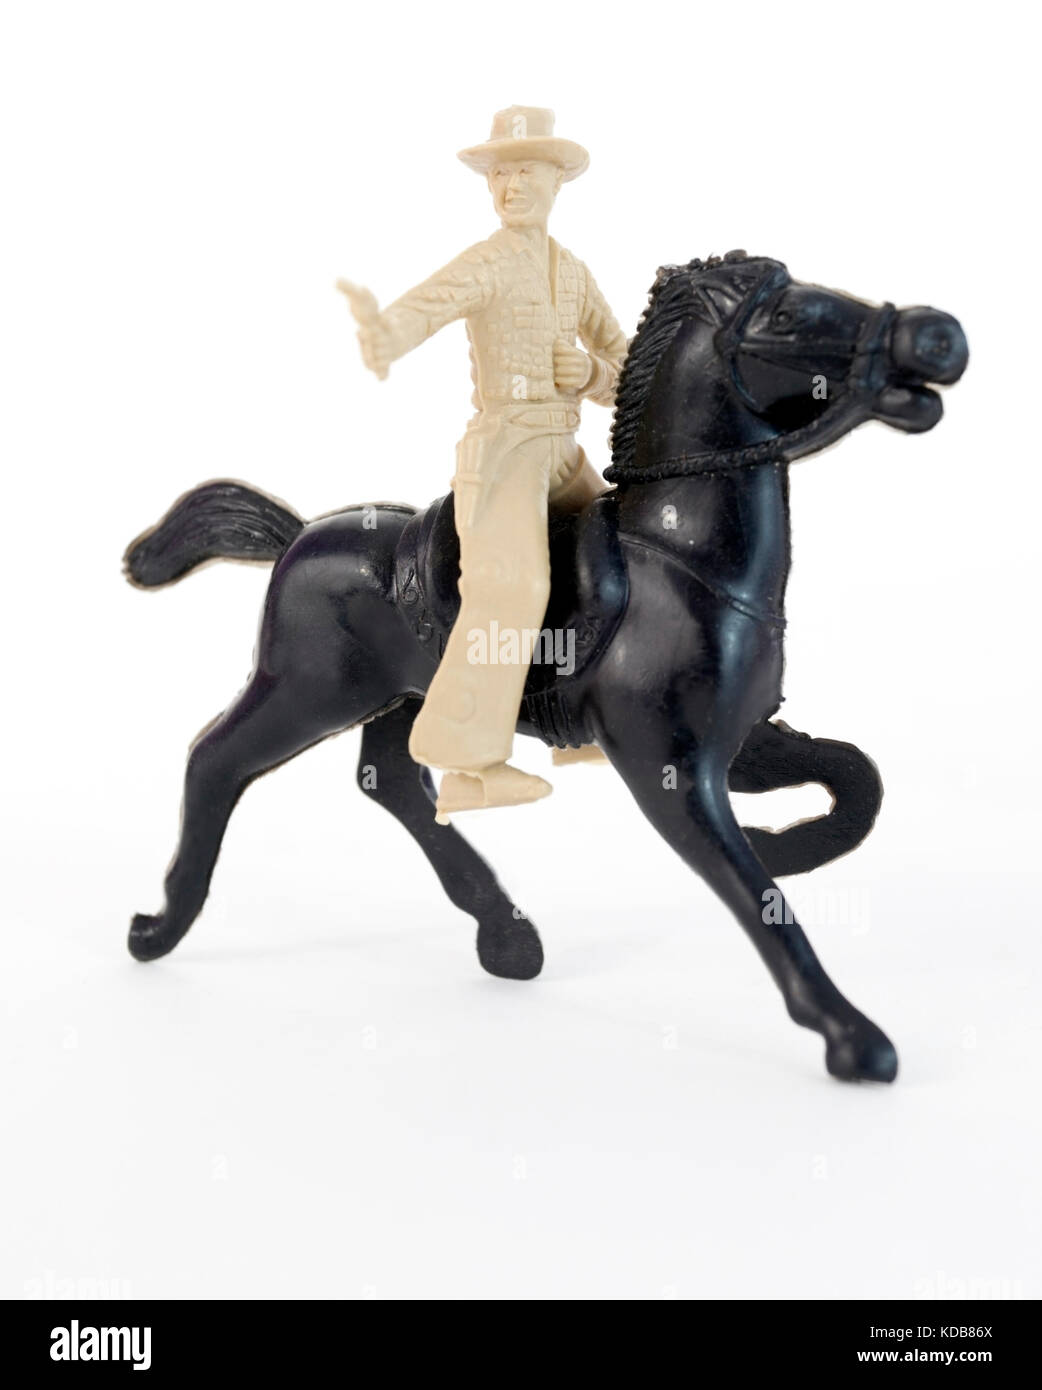 Plastic toy cowboy with pistol on black horse. Stock Photo